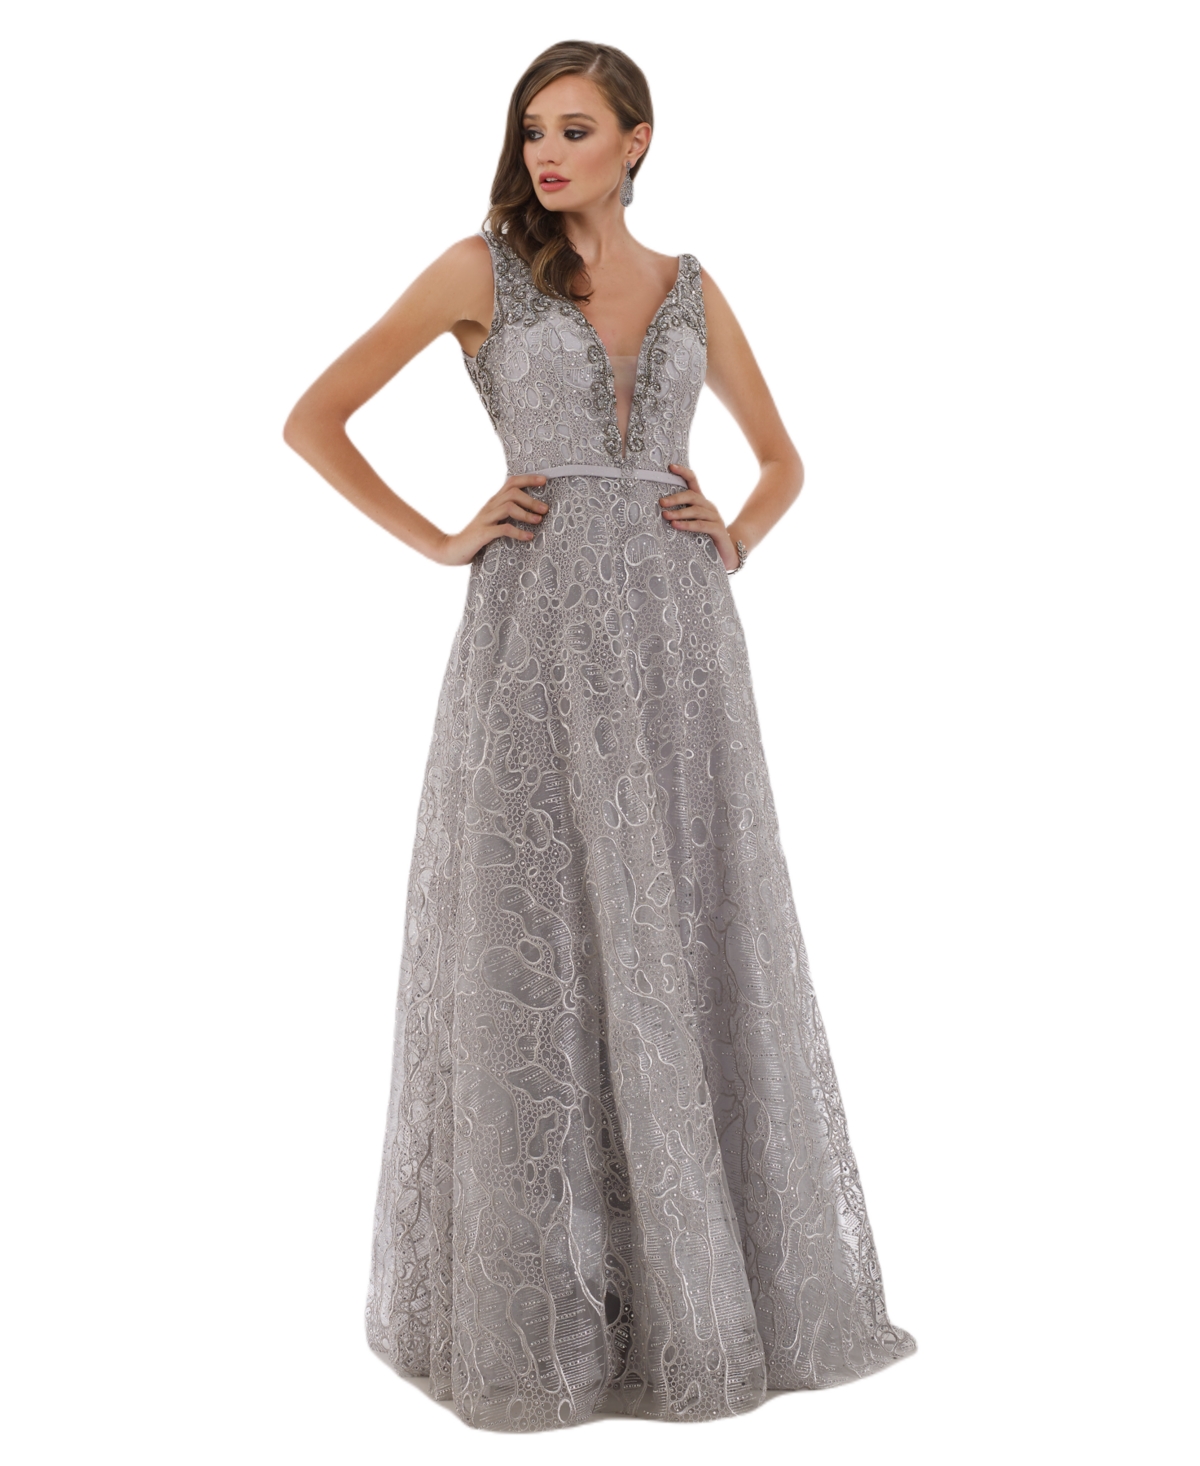 Women's Beaded V Neck lace Ball gown - Silver